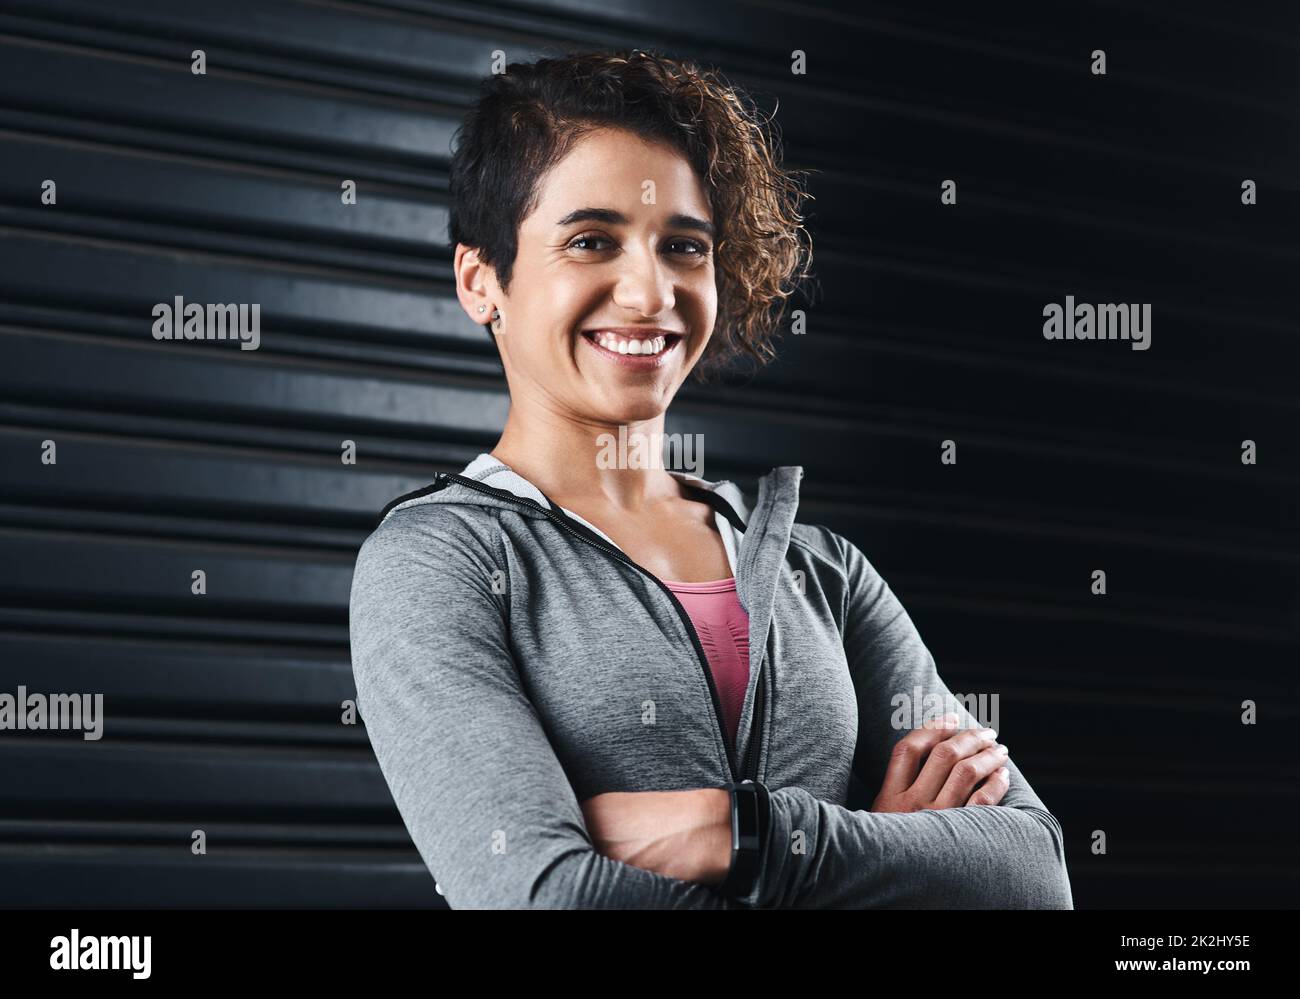 Fit is a lifestyle. Cropped portrait of an attractive young woman standing against a black background in her workout clothes before exercising. Stock Photo